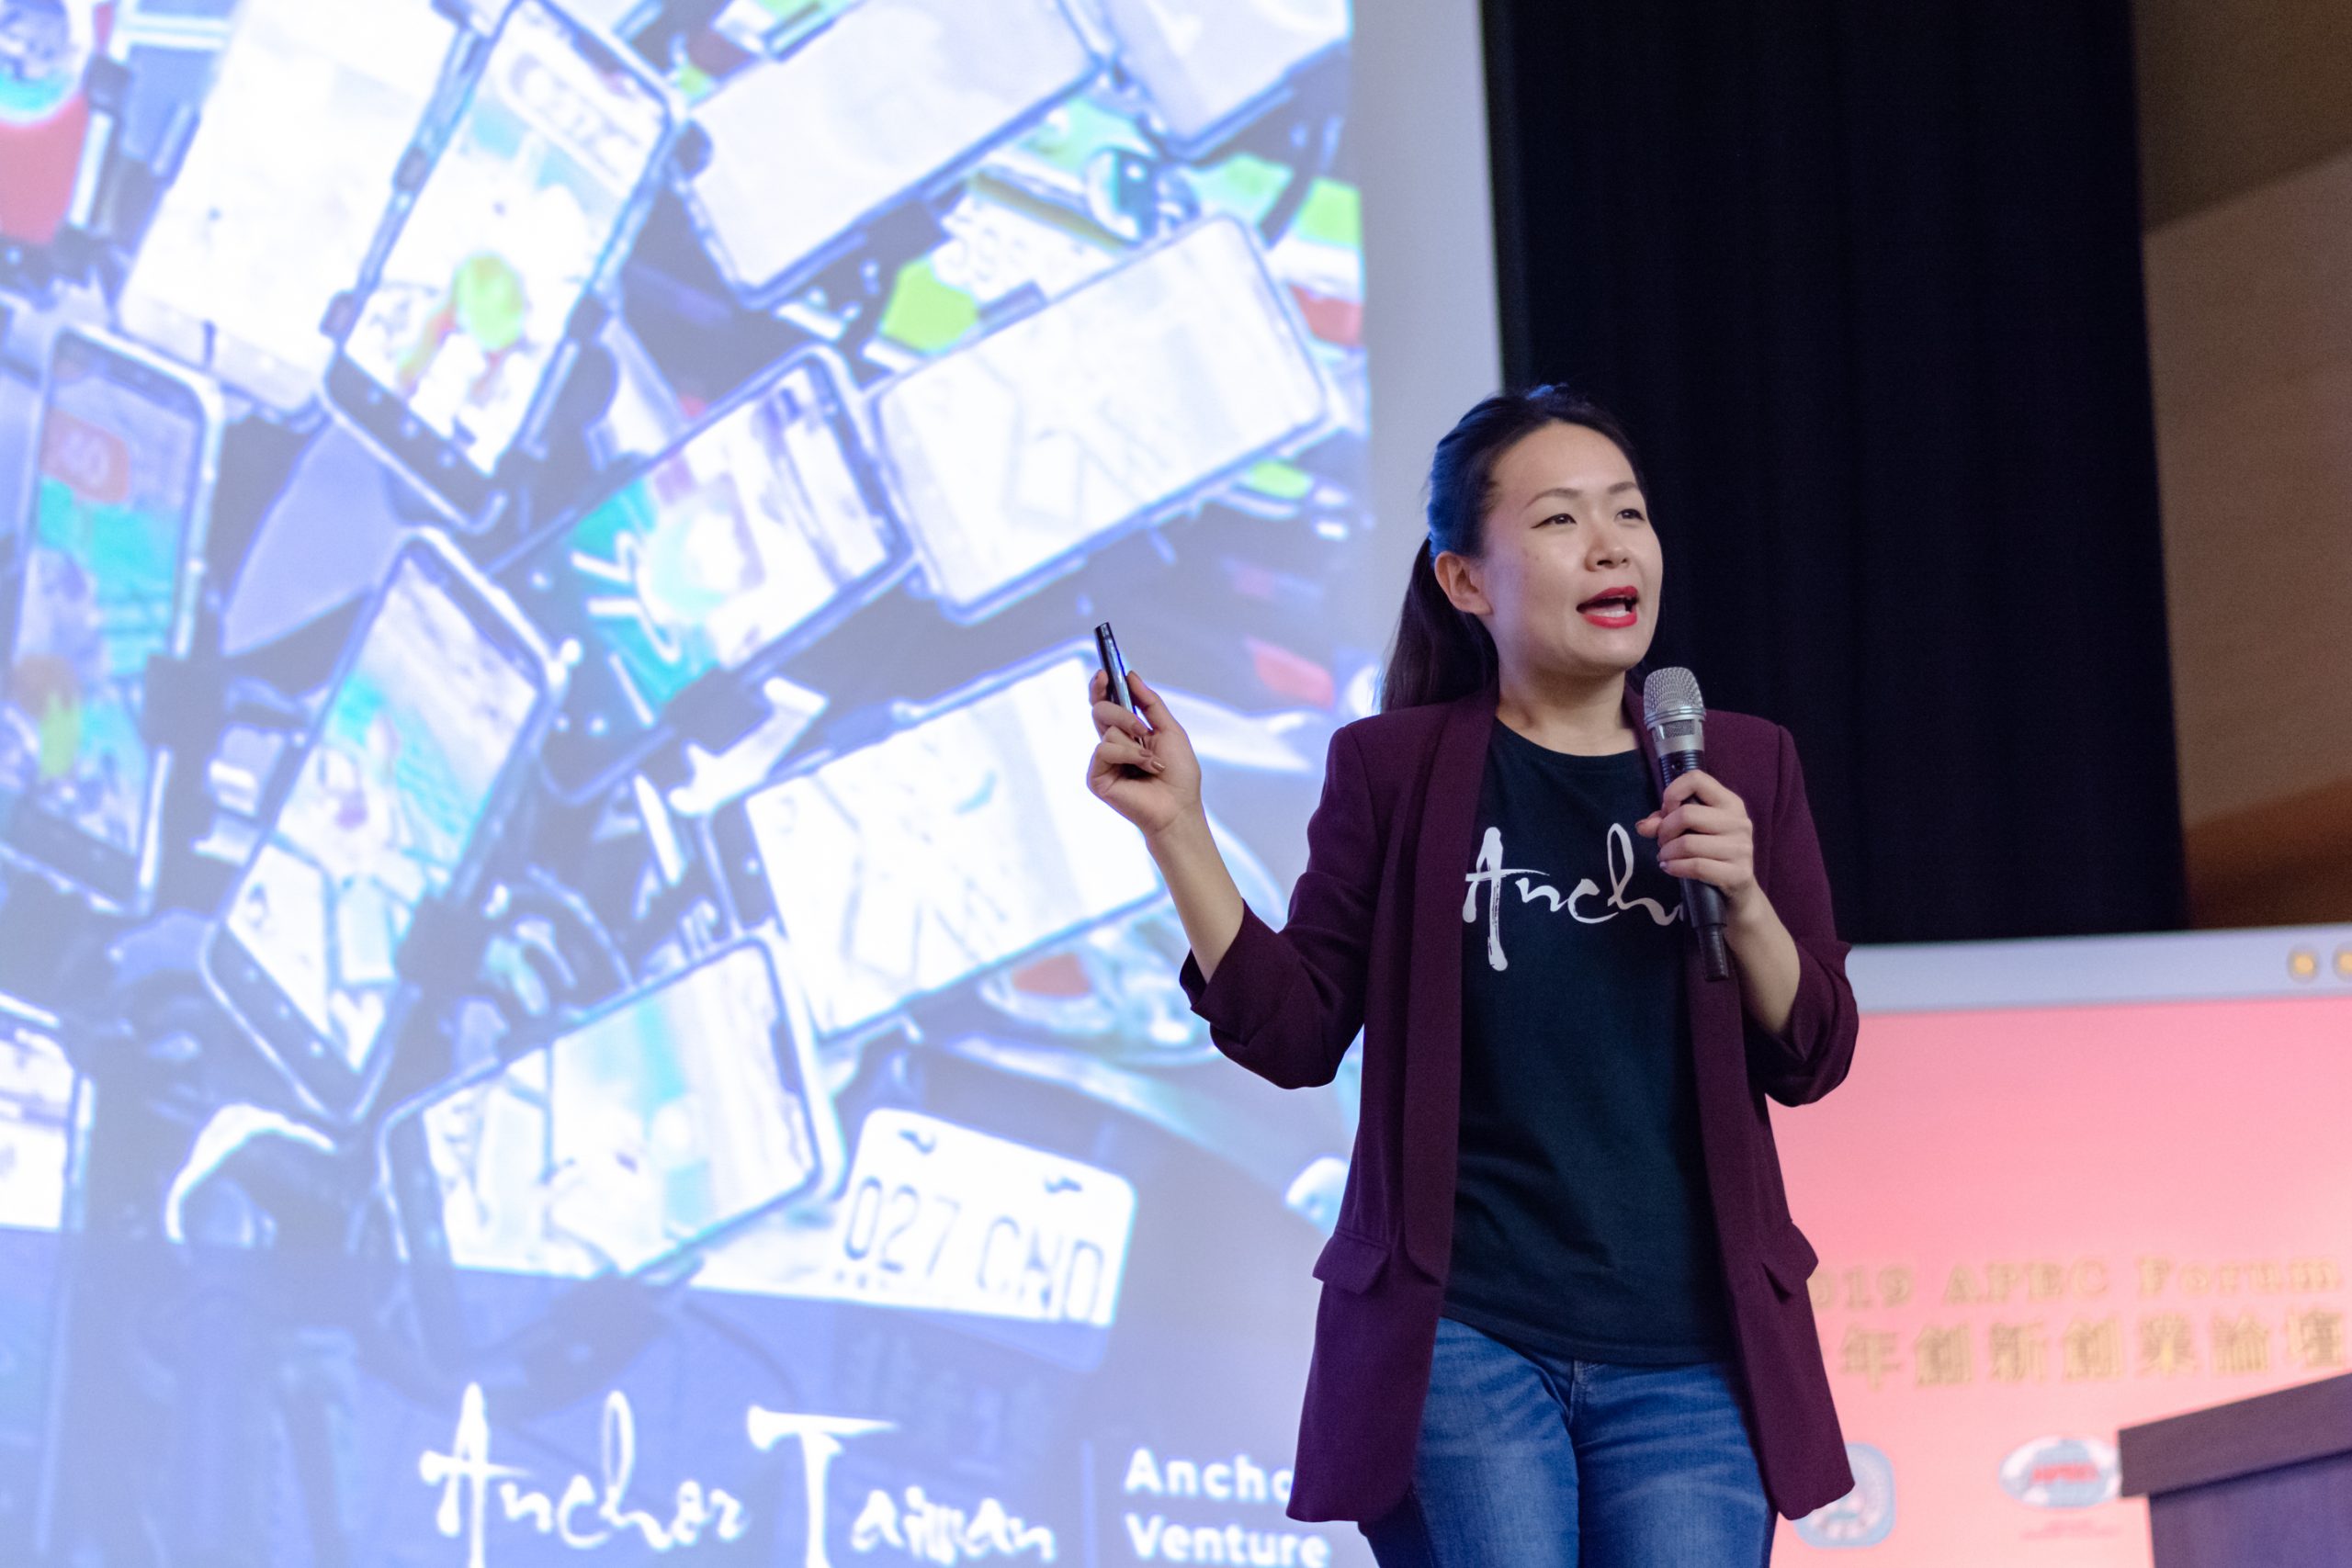 [Tuning In] Elisa Chiu, founder of Anchor Taiwan, spotlights Taiwan’s supply chain boosted innovation ecosystem